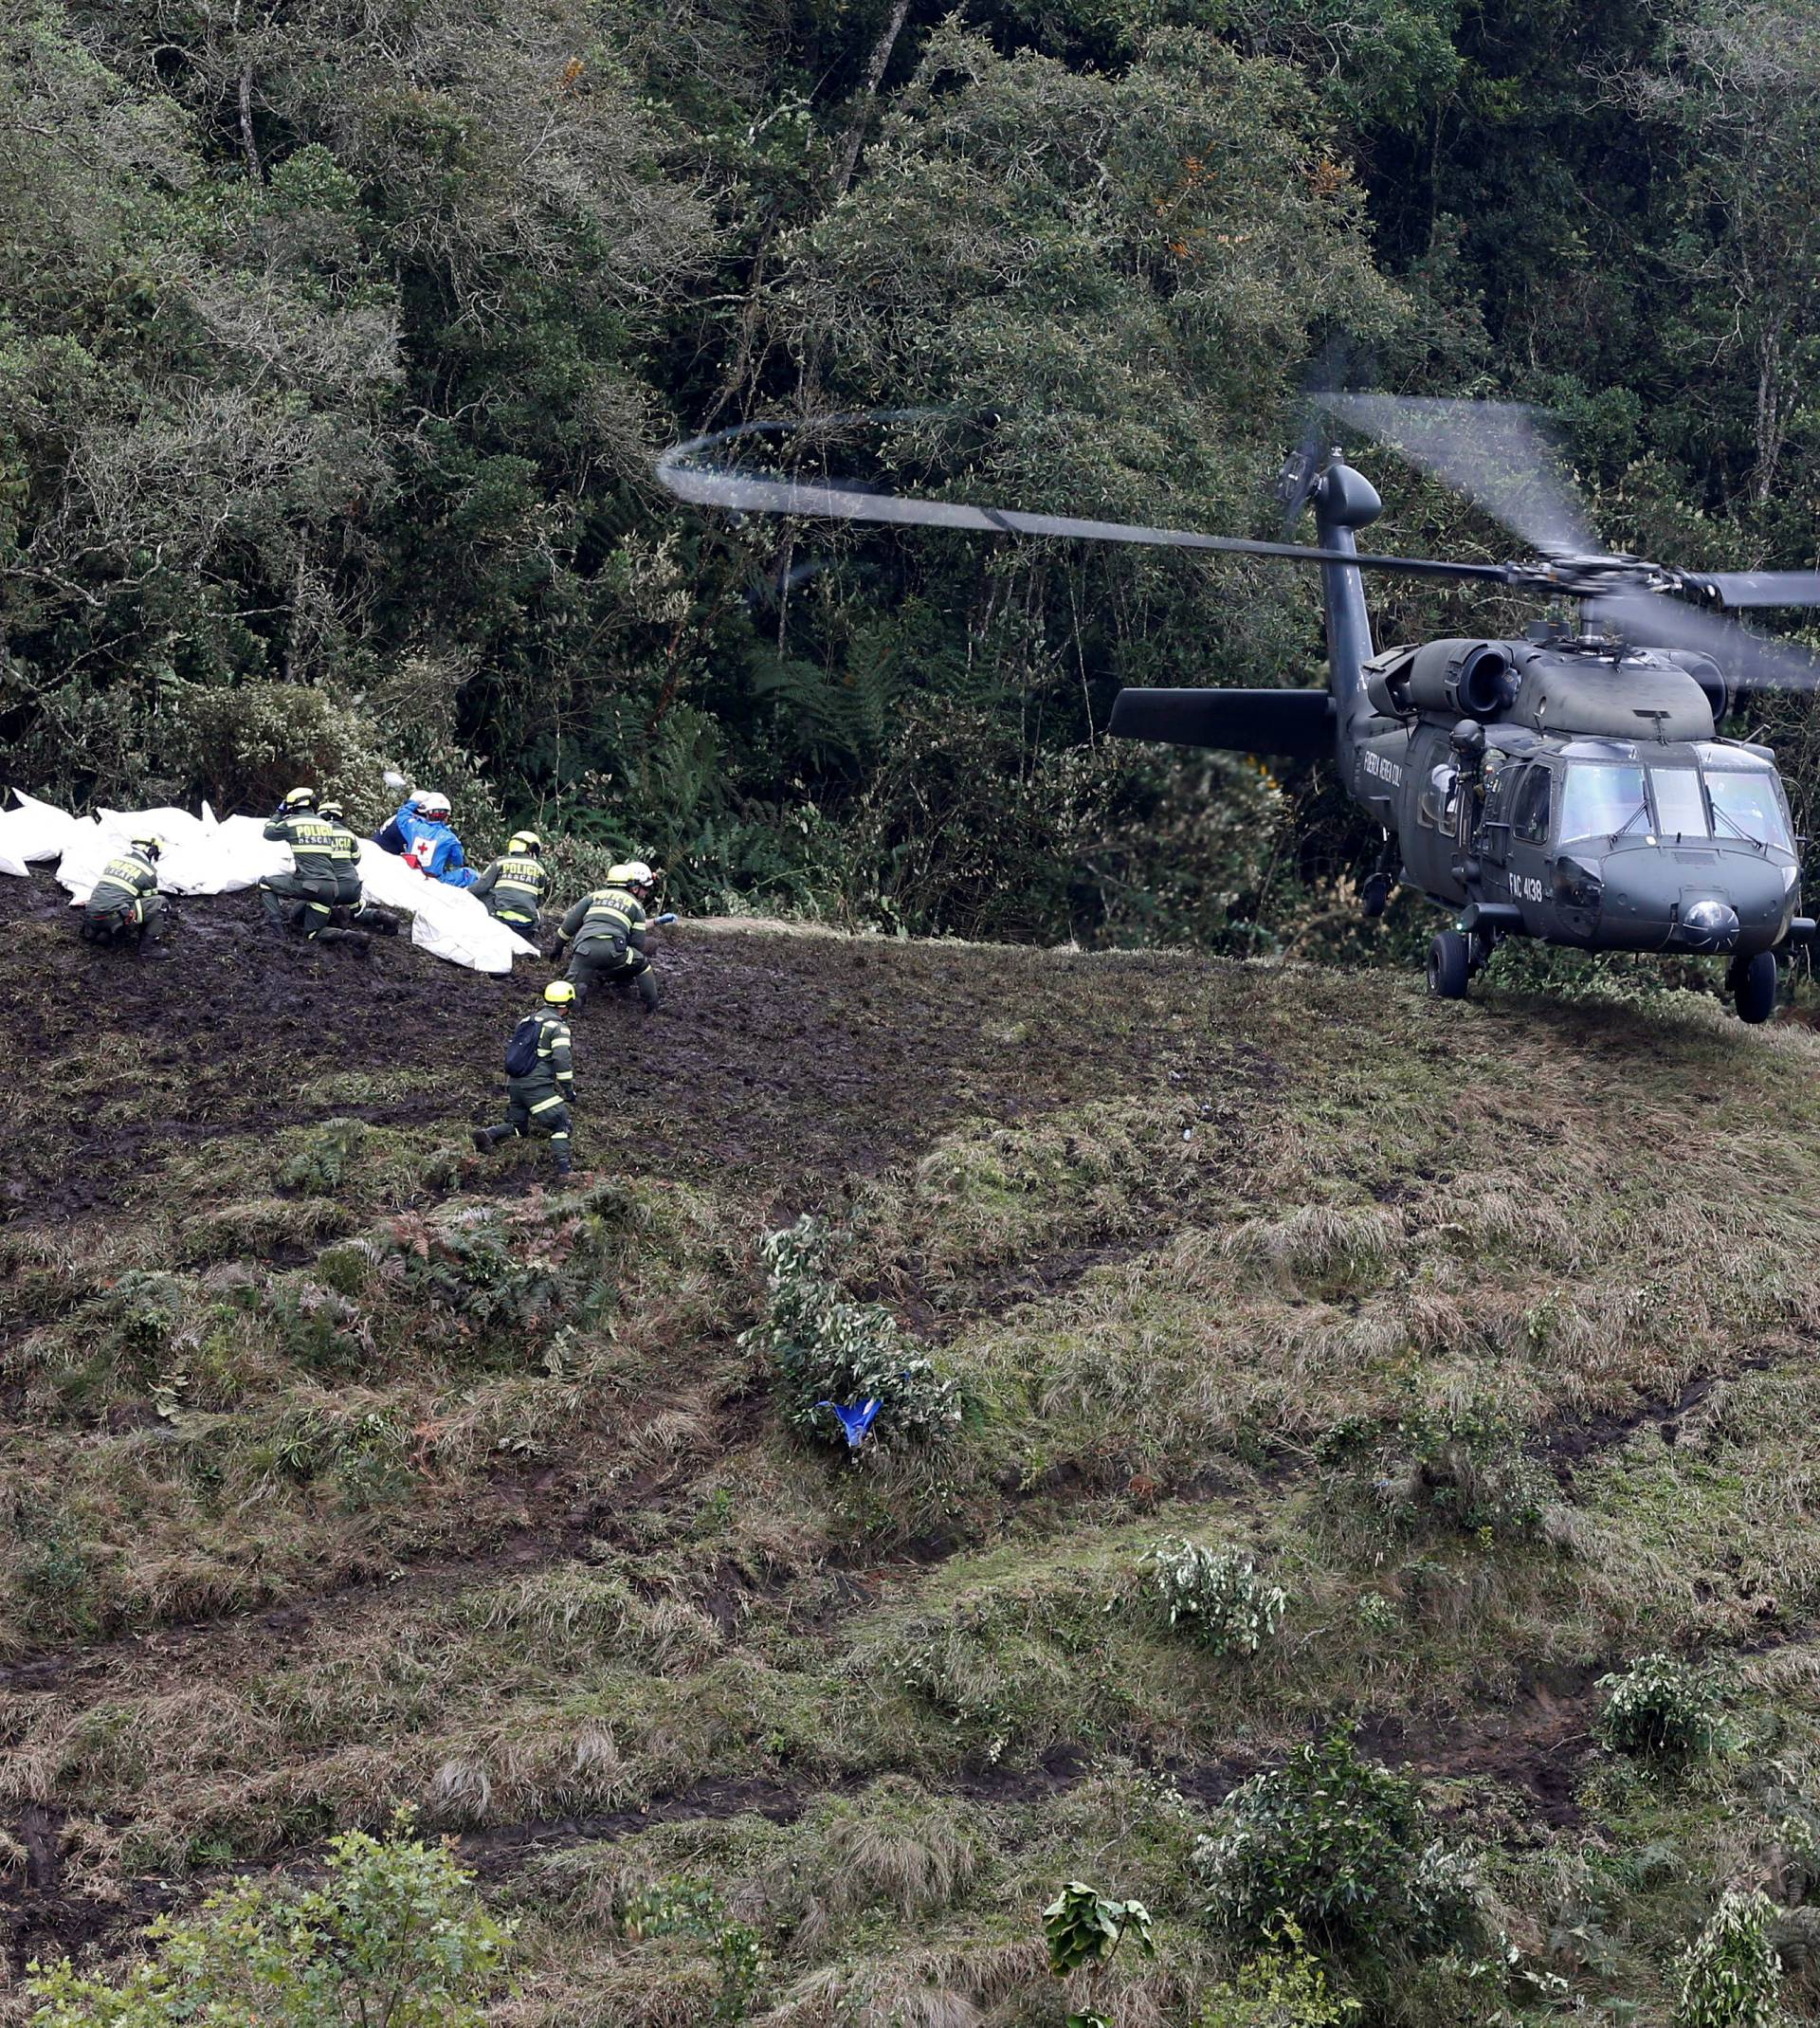 A Colombian air force helicopter arrives to retrieve the bodies of victims from the wreckage of a plane that crashed into the Colombian jungle with Brazilian soccer team Chapecoense onboard, near Medellin